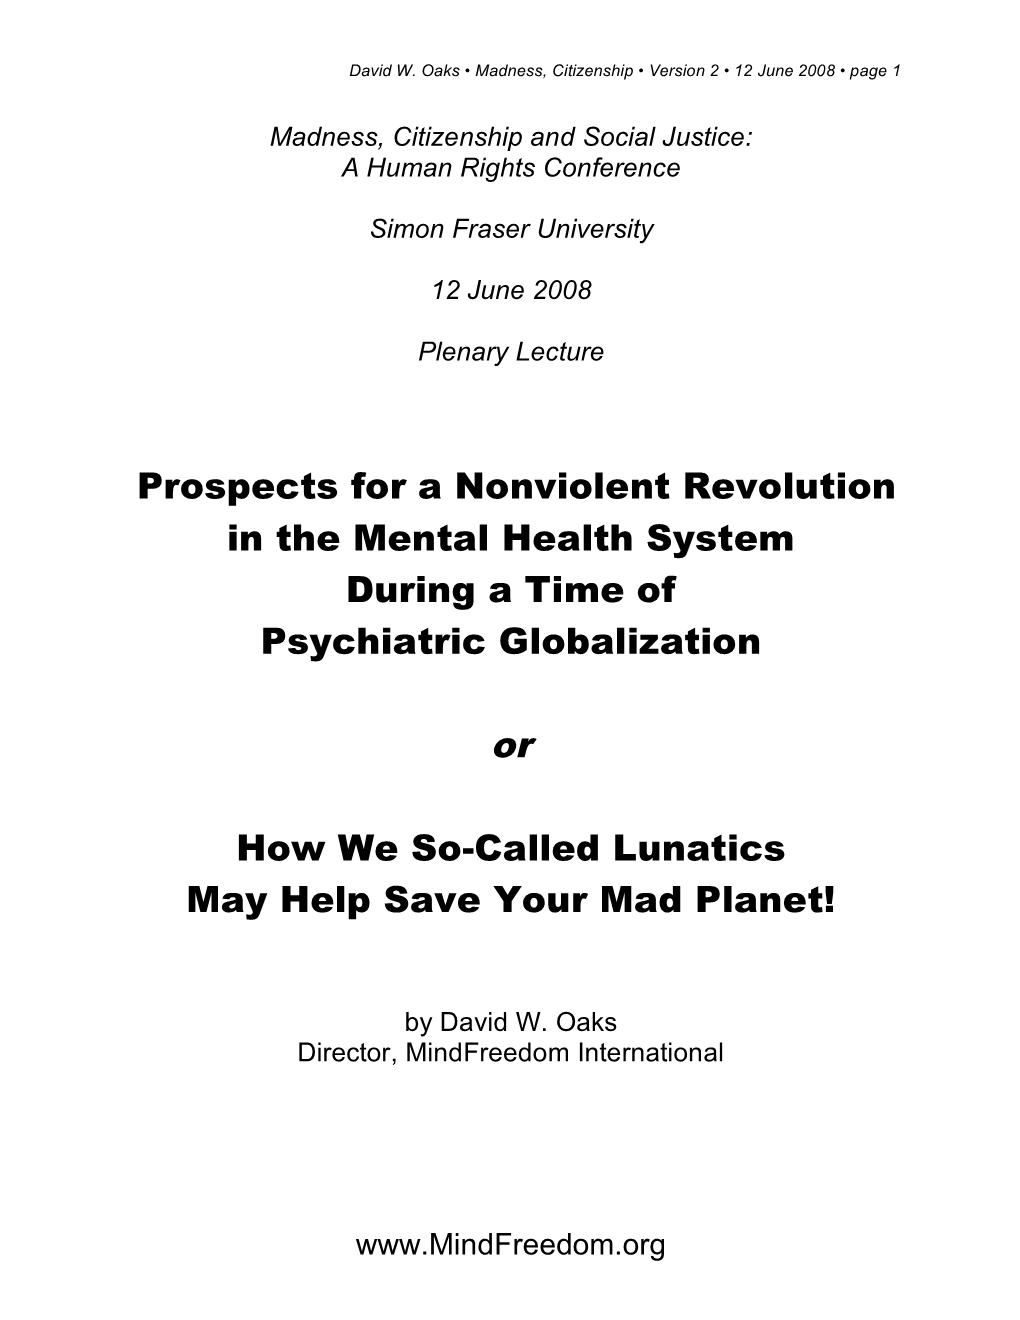 Prospects for a Nonviolent Revolution in the Mental Health System During a Time of Psychiatric Globalization